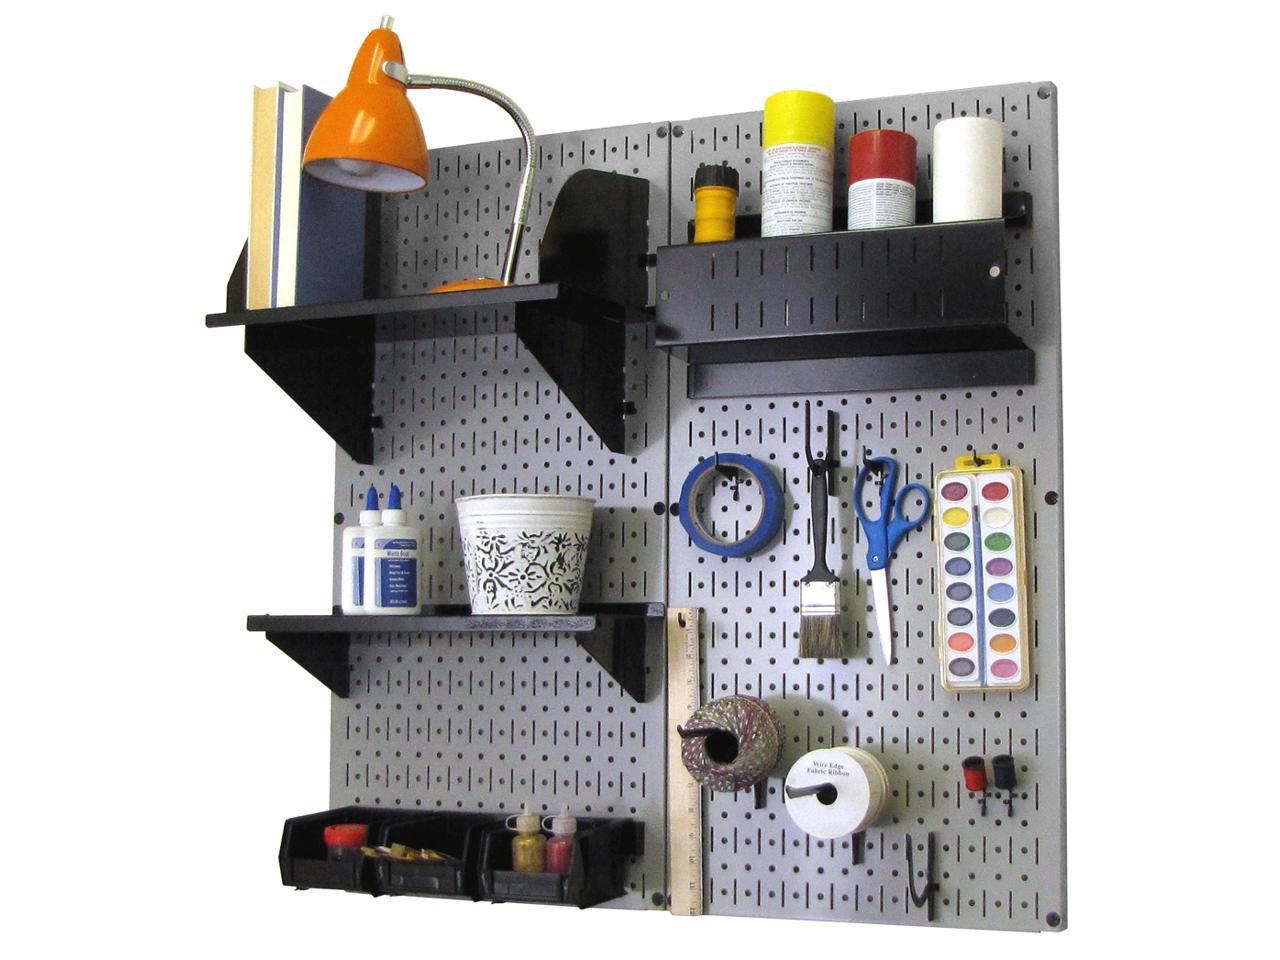 Wall Control Pegboard Hobby Craft Pegboard Organizer Storage Kit with Gray Pegboard and Black Accessories - image 1 of 6